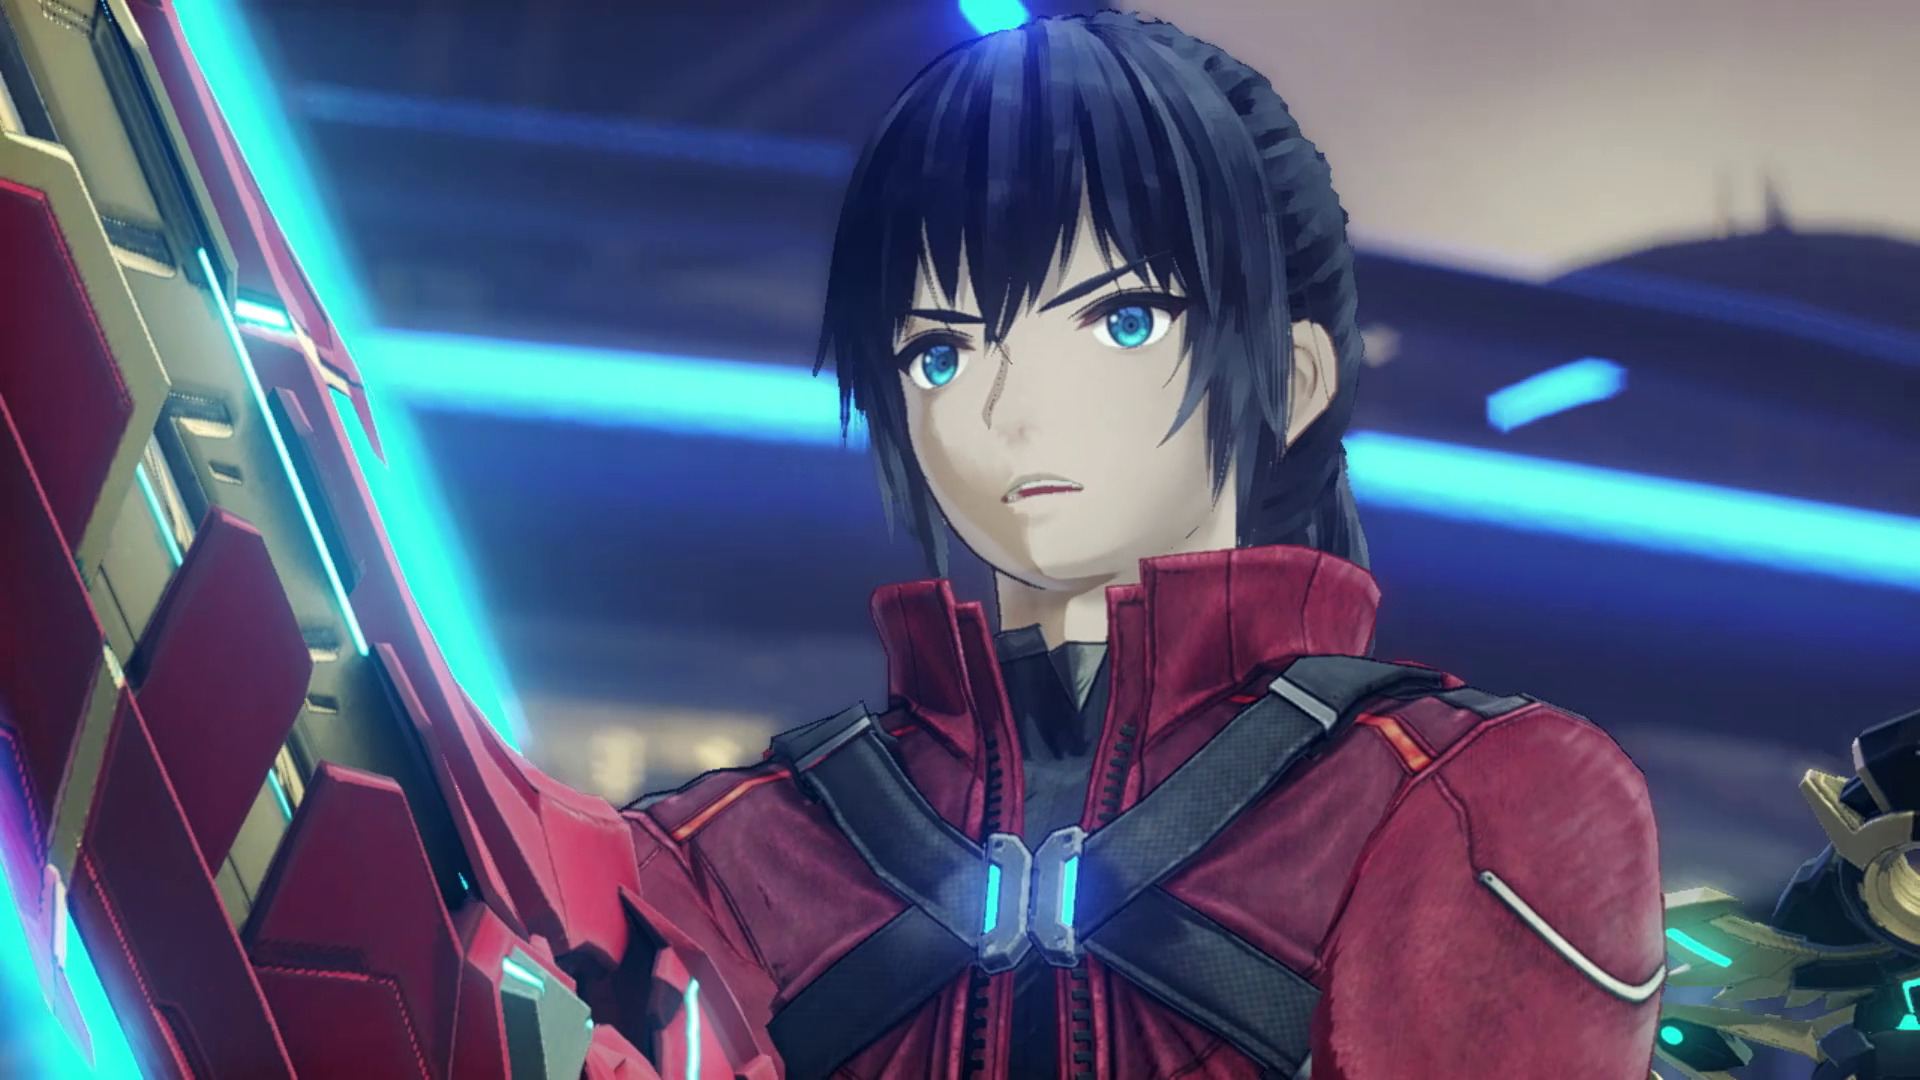 Xenoblade Chronicles 3 Future Redeemed DLC: Release Date, Price, Characters